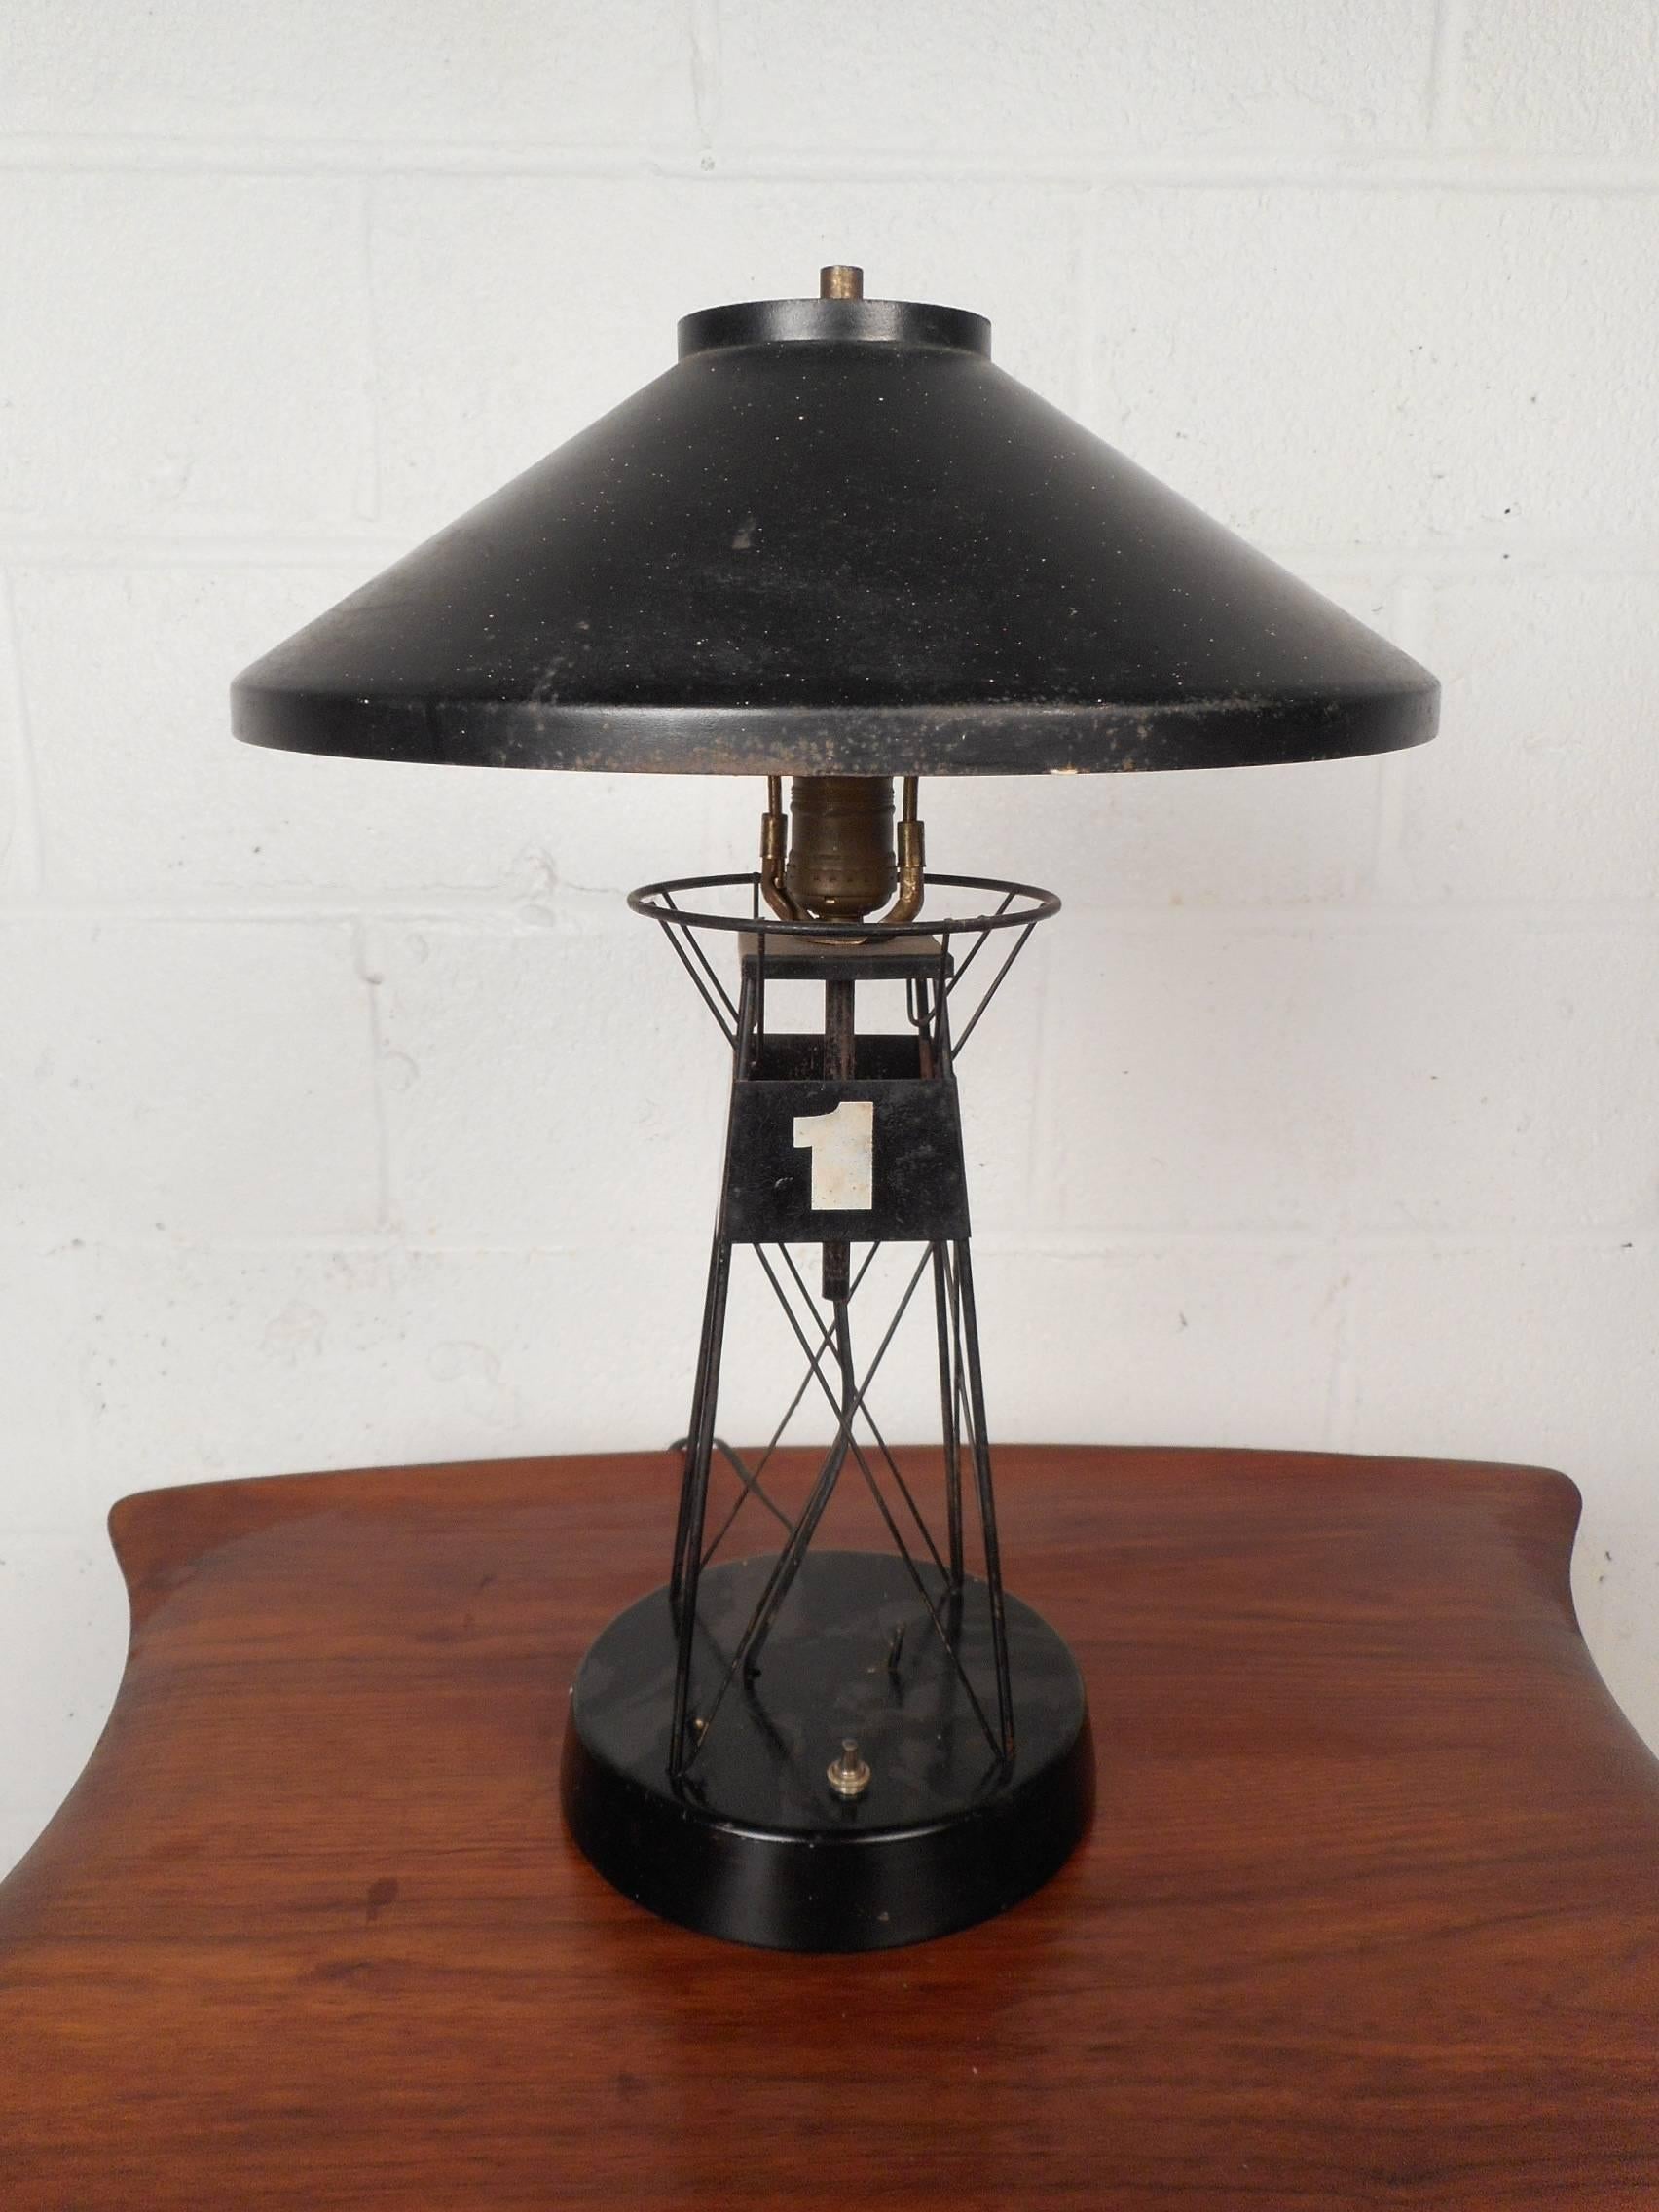 This gorgeous vintage table lamp is shaped like a lighthouse with the number one on it. The unique spoked design is made of metal. This wonderful lamp makes the perfect addition to any setting. Please confirm item location (NY or NJ).